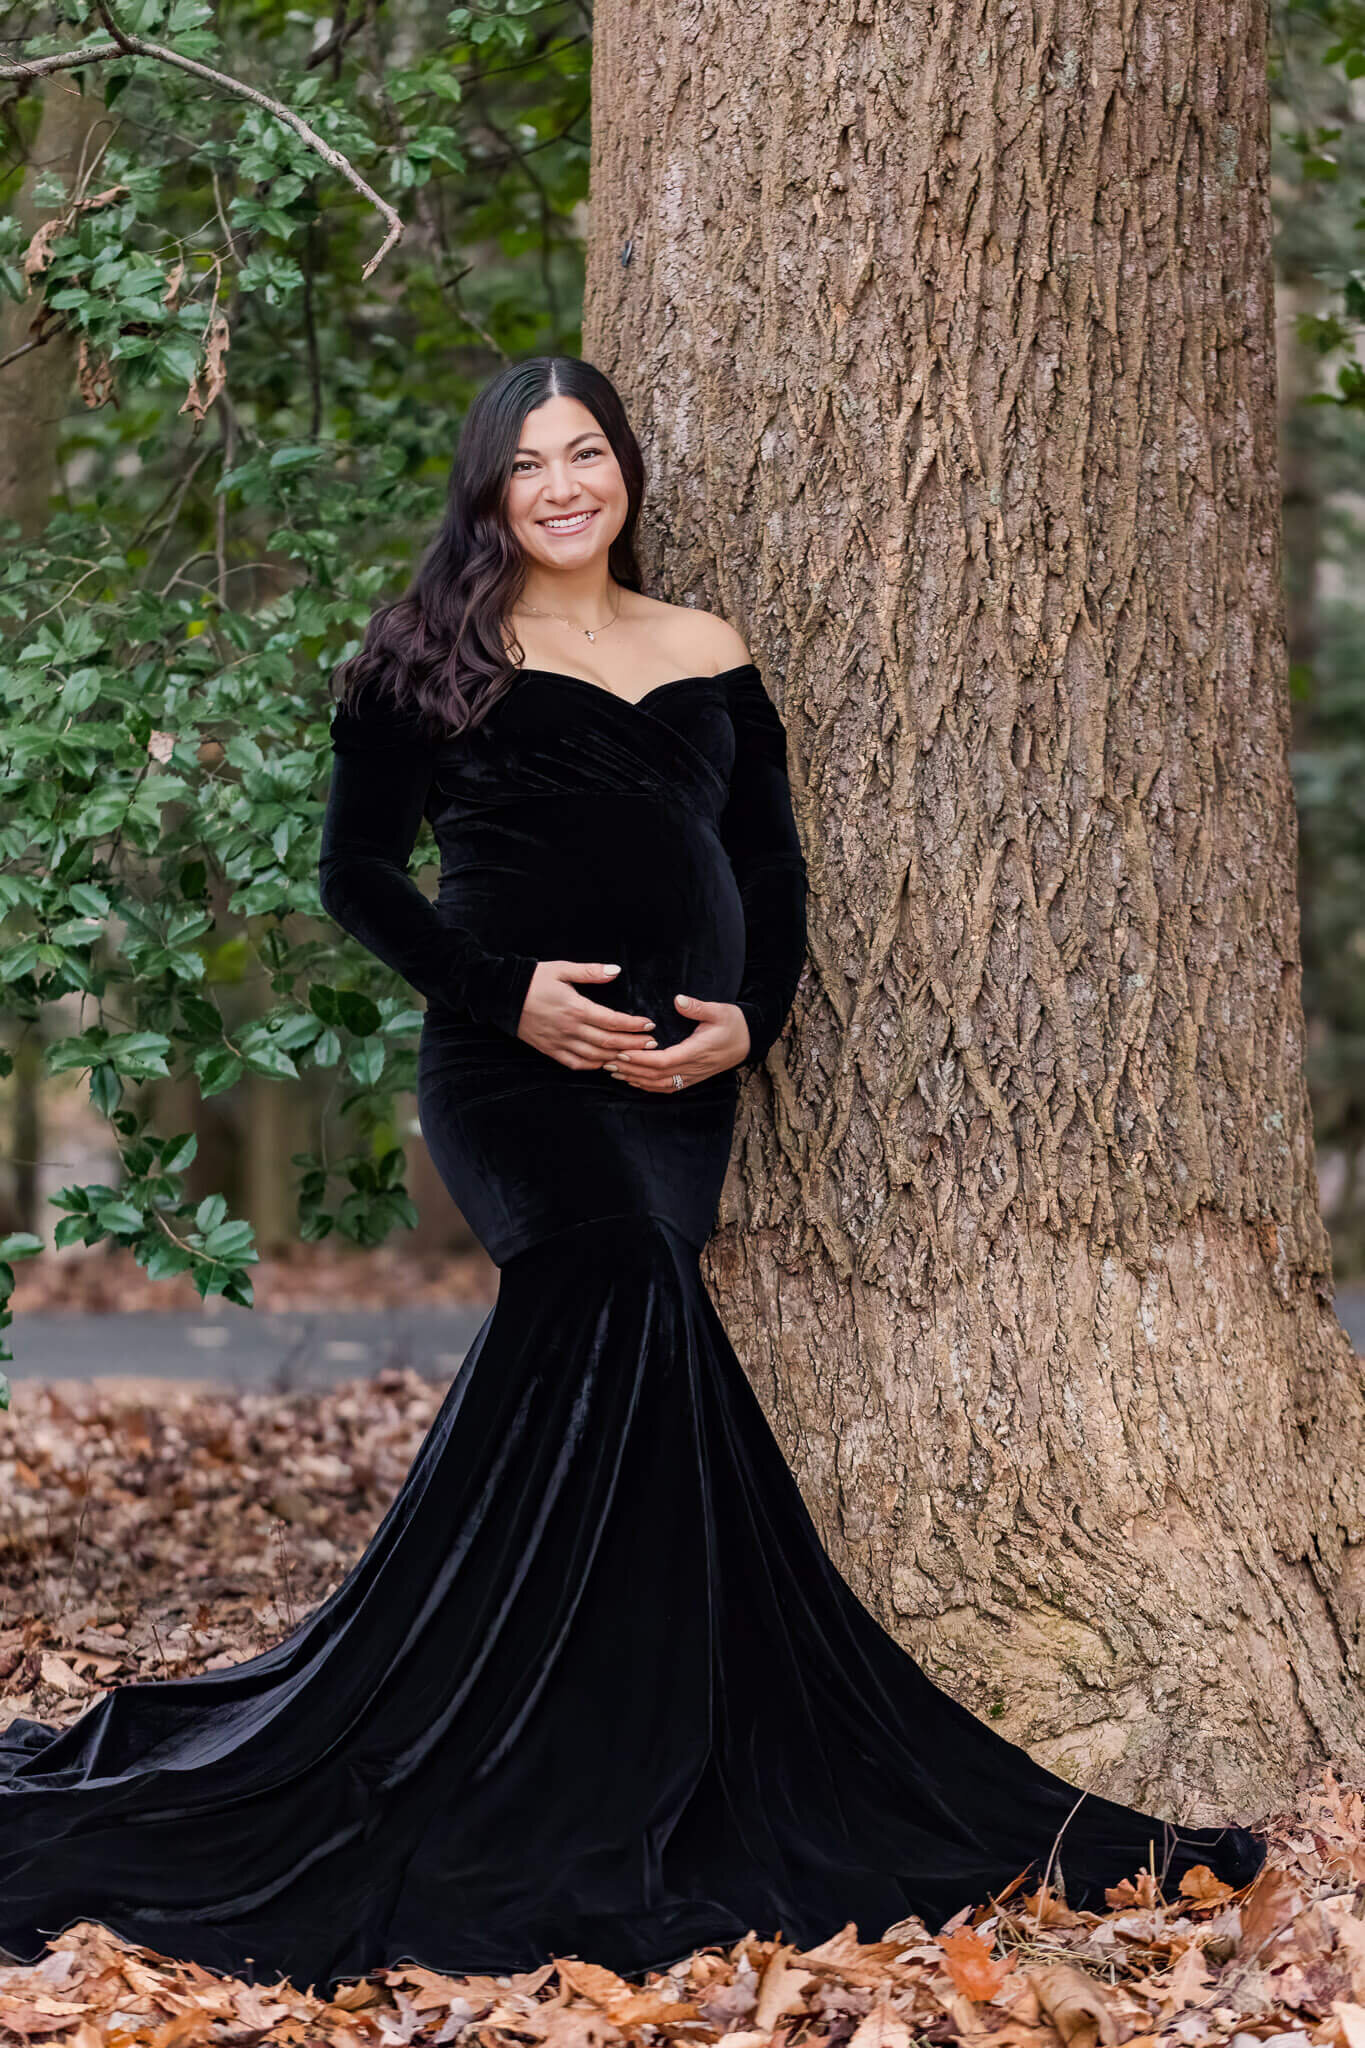 A momma-to-be holding her pregnant belly and leaning against a tree at a park.